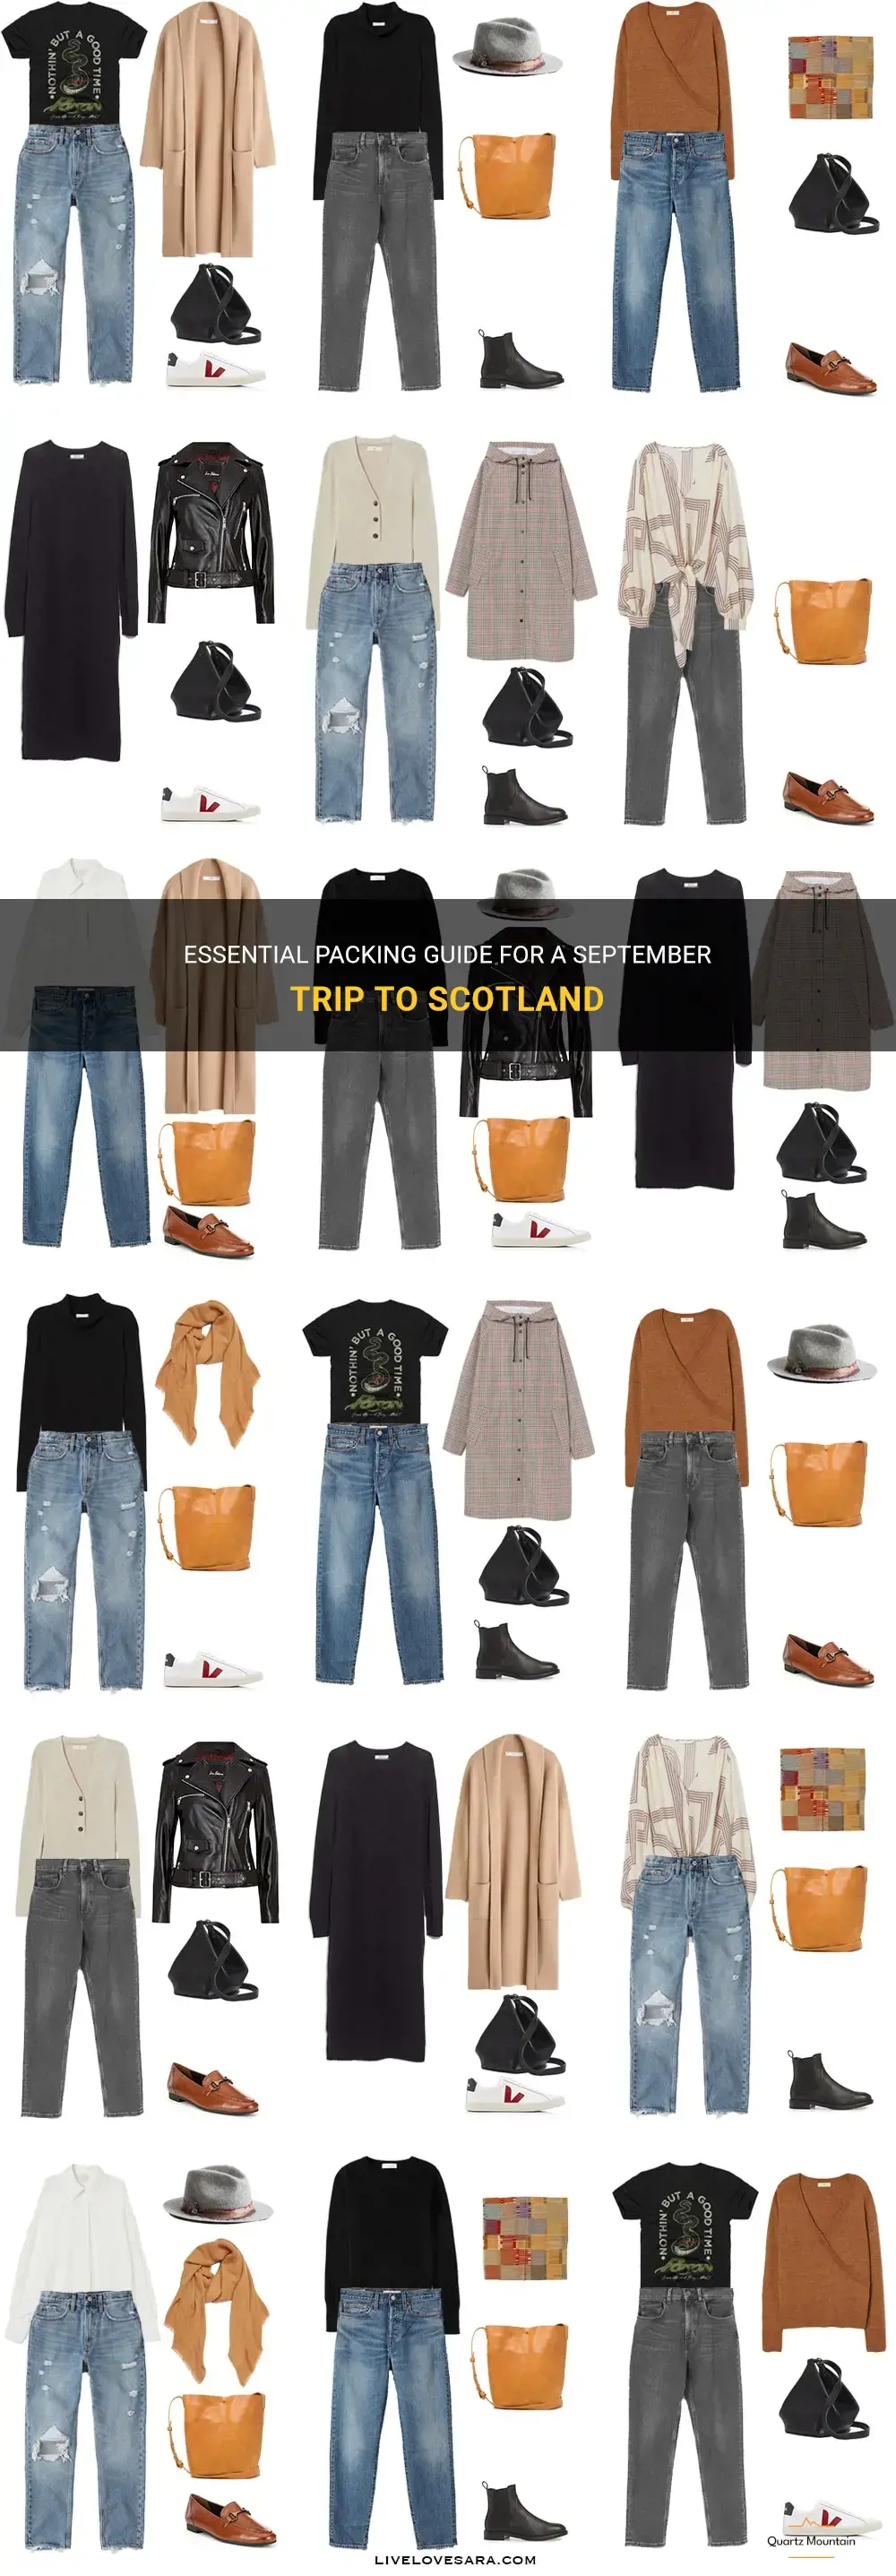 what to pack for a september trip to scotland